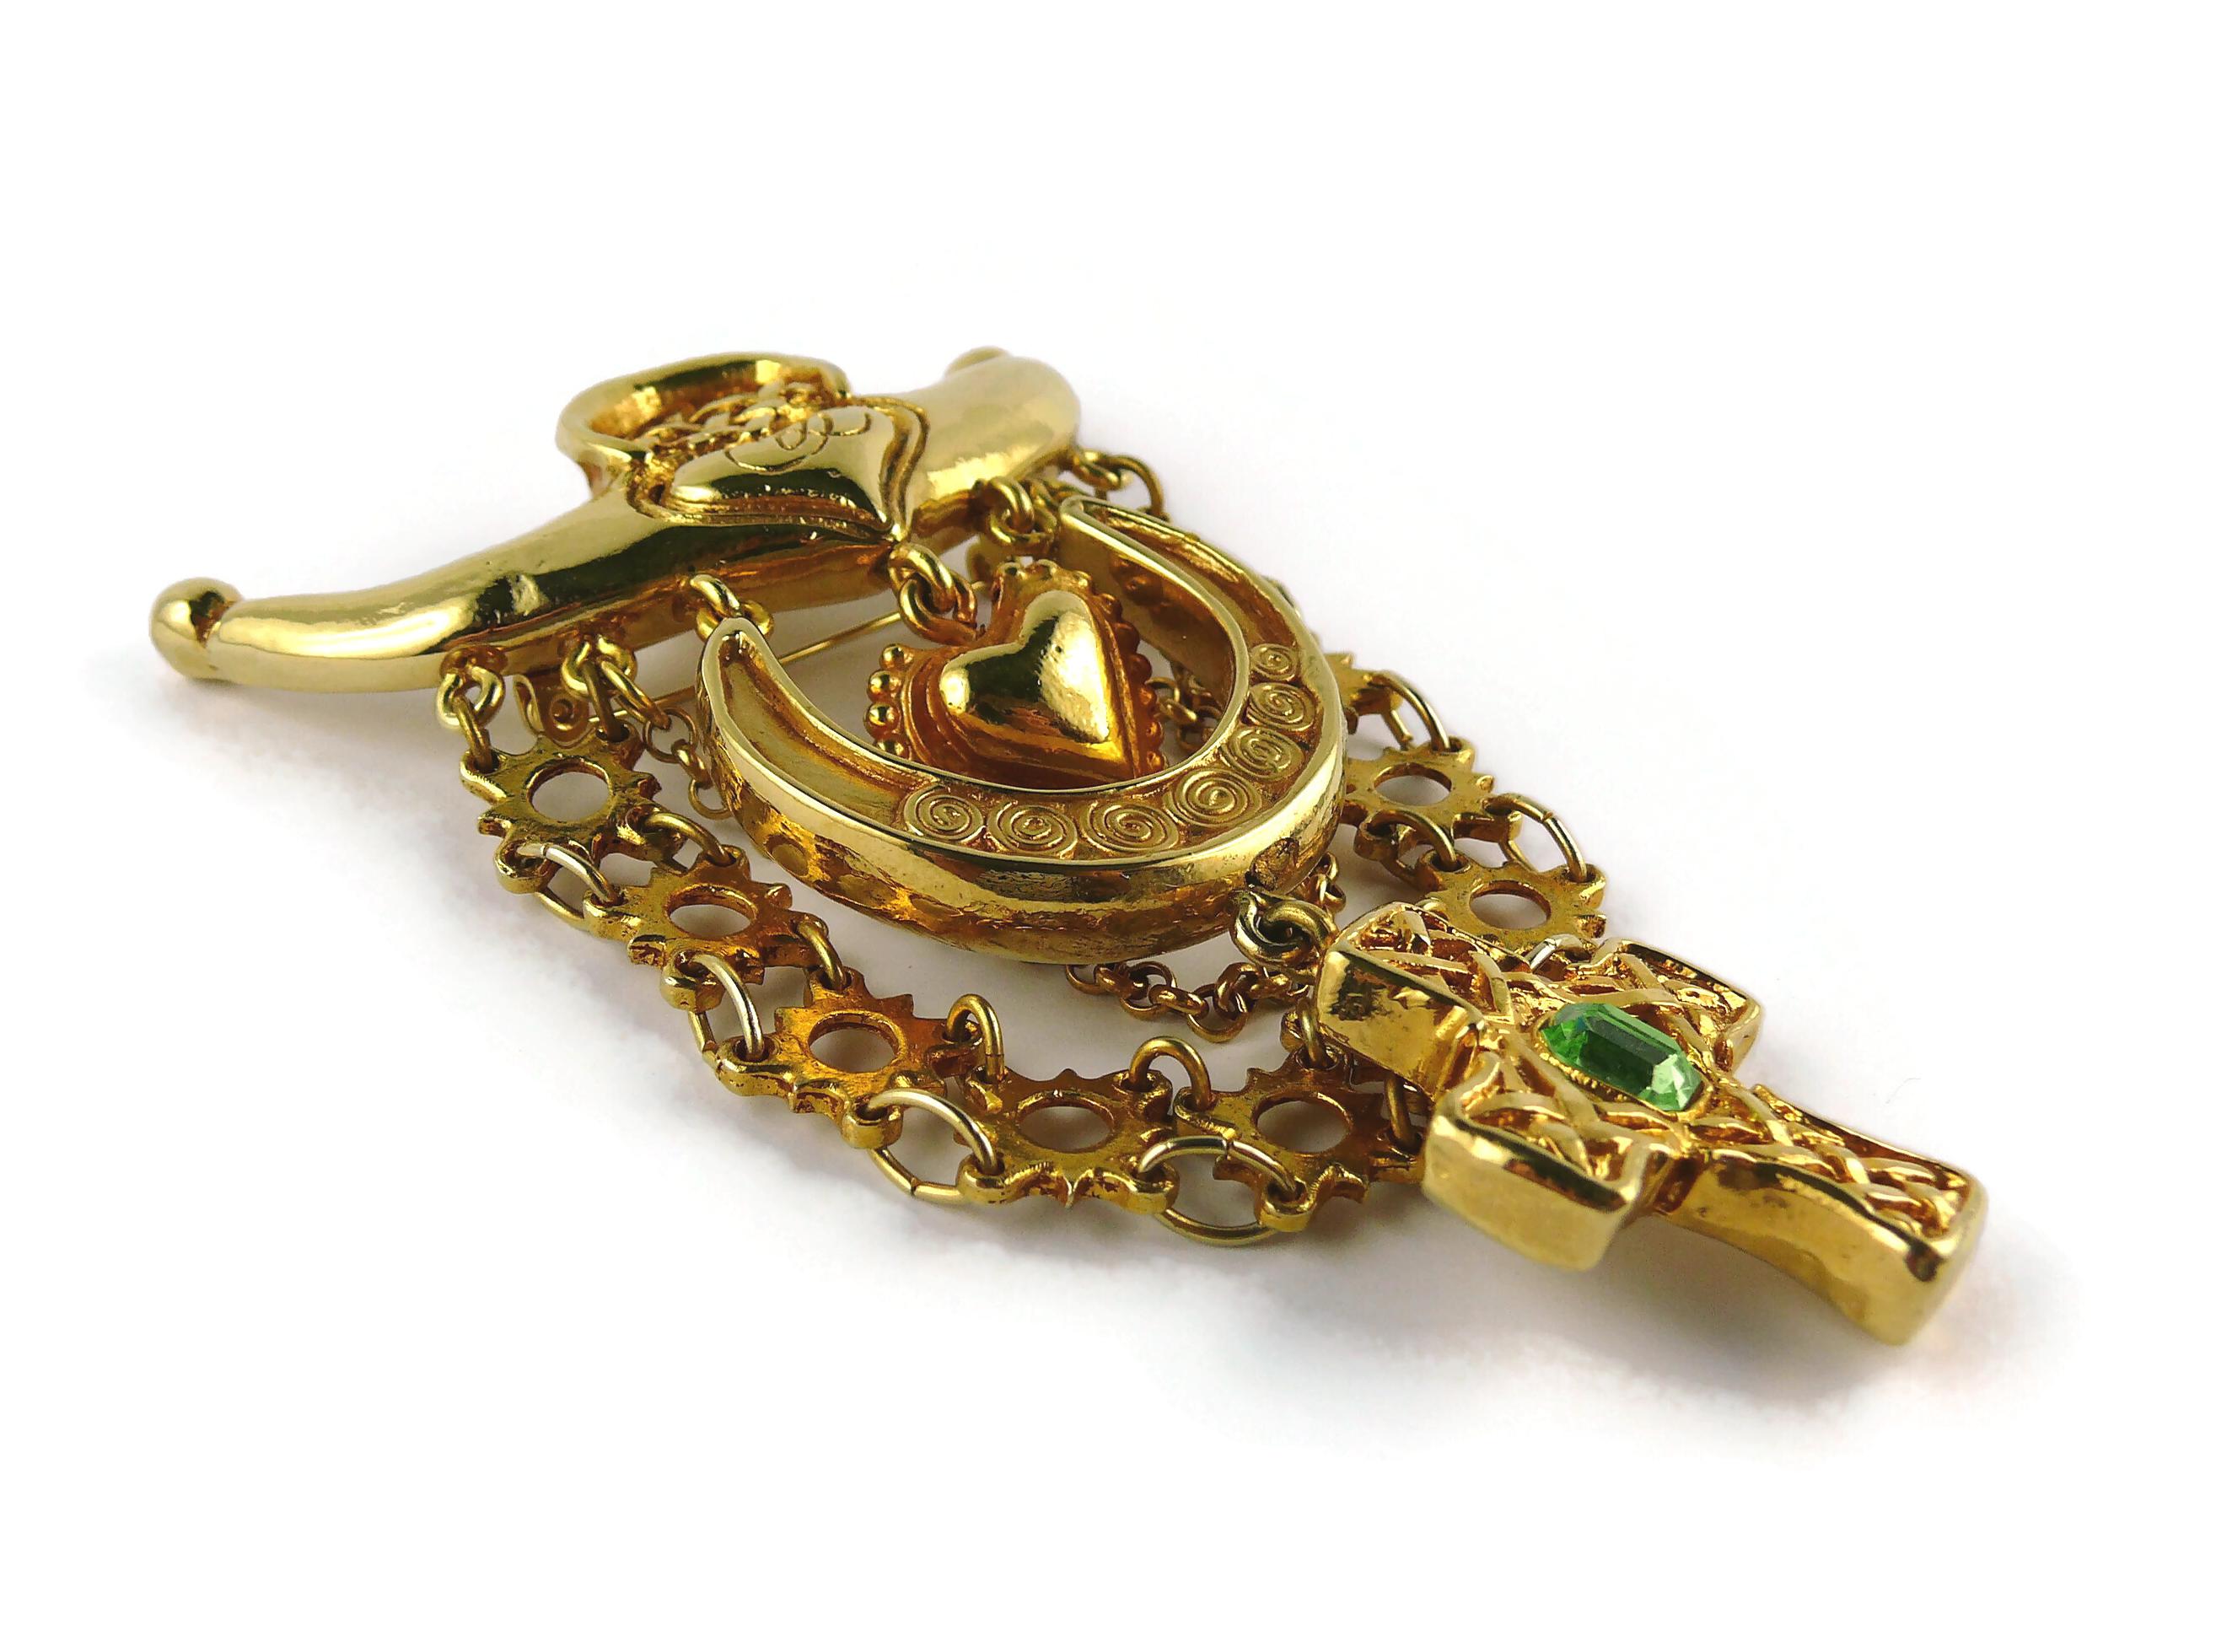 Christian Lacroix Vintage Opulent Arlesian Inspired Brooch For Sale 2